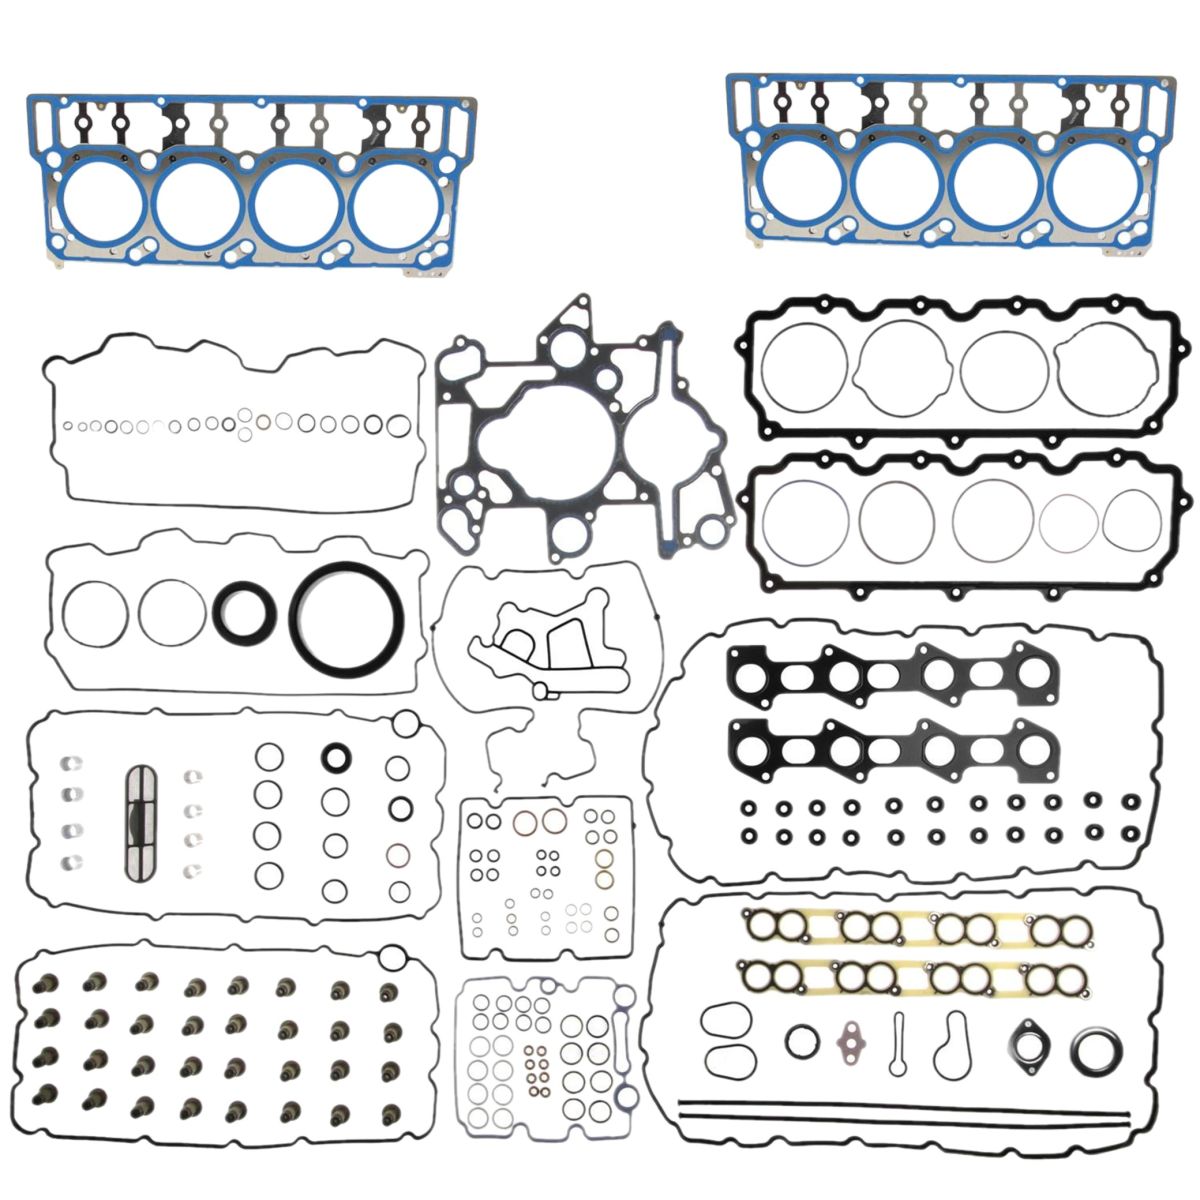 OEM Ford - OEM 20MM Head Gaskets - Mahle Engine Rebuild Kit For 06-07 Ford 6.0L Powerstroke